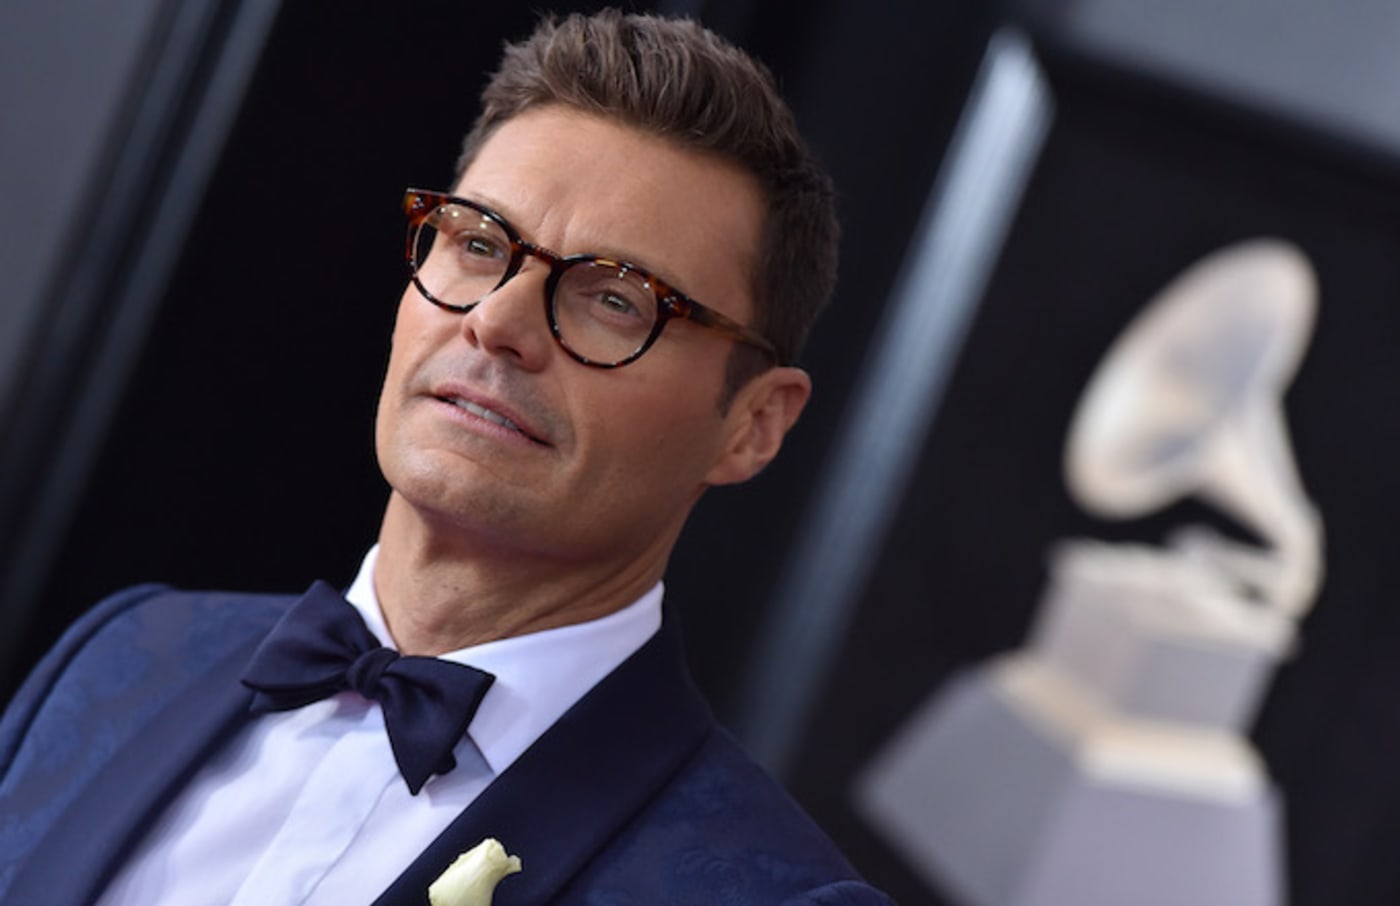 Ryan Seacrest attends the 60th Annual Grammy Awards at Madison Square Garden.